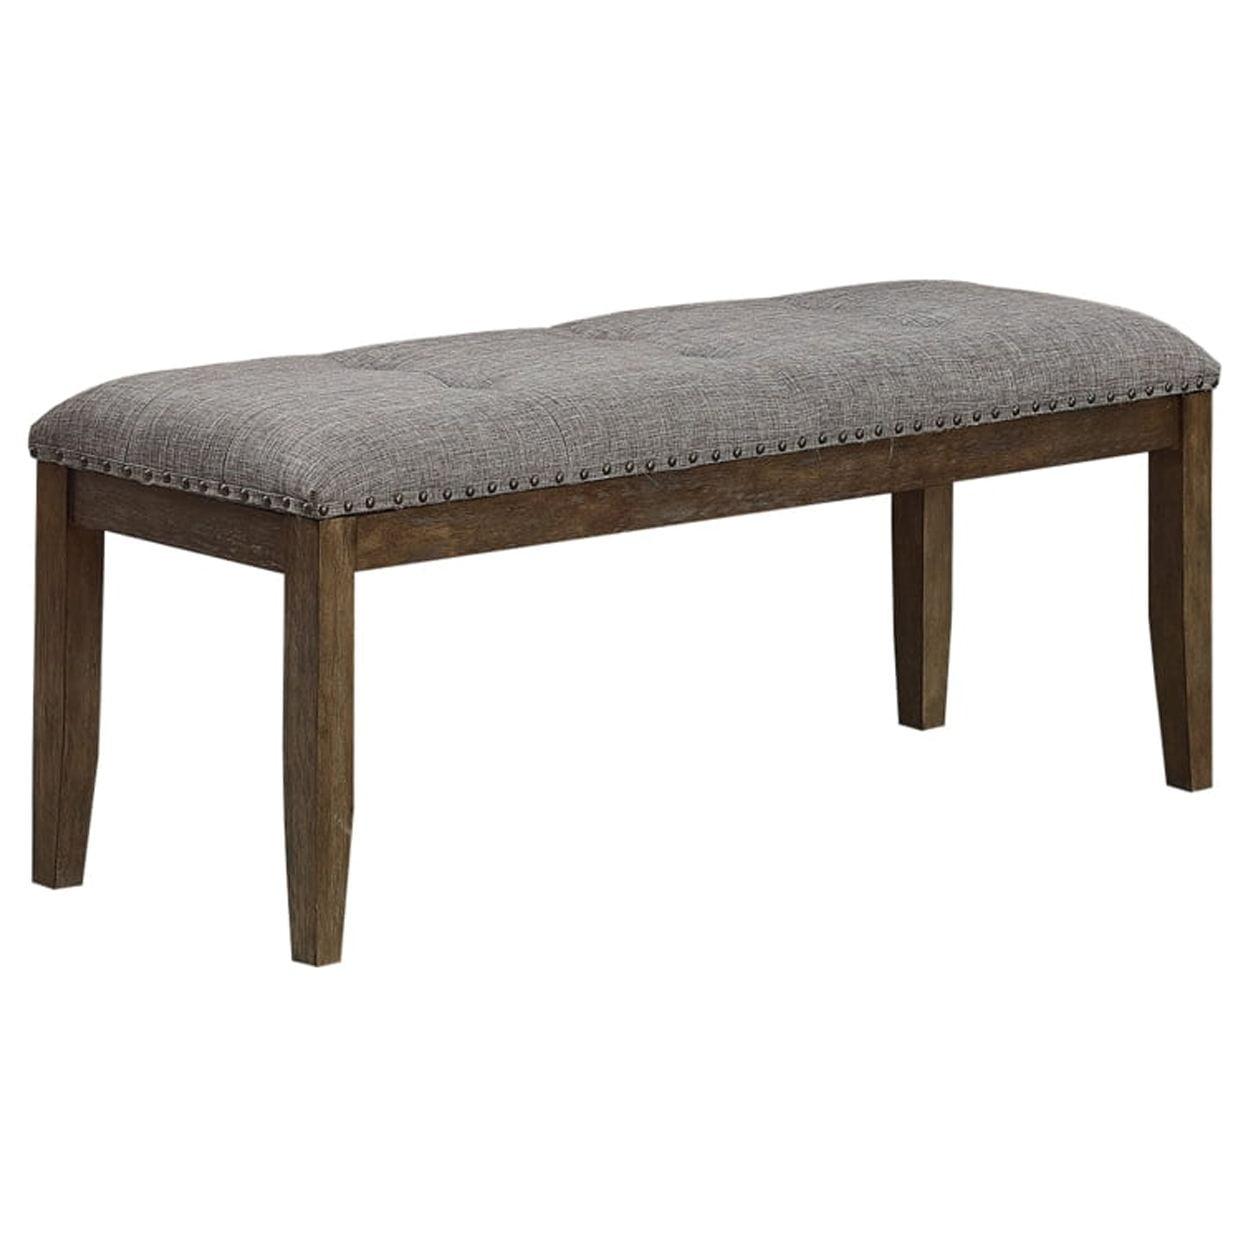 Transitional Flare Chamfered Leg Fabric Bench with Nailhead Trim, Brown and Gray